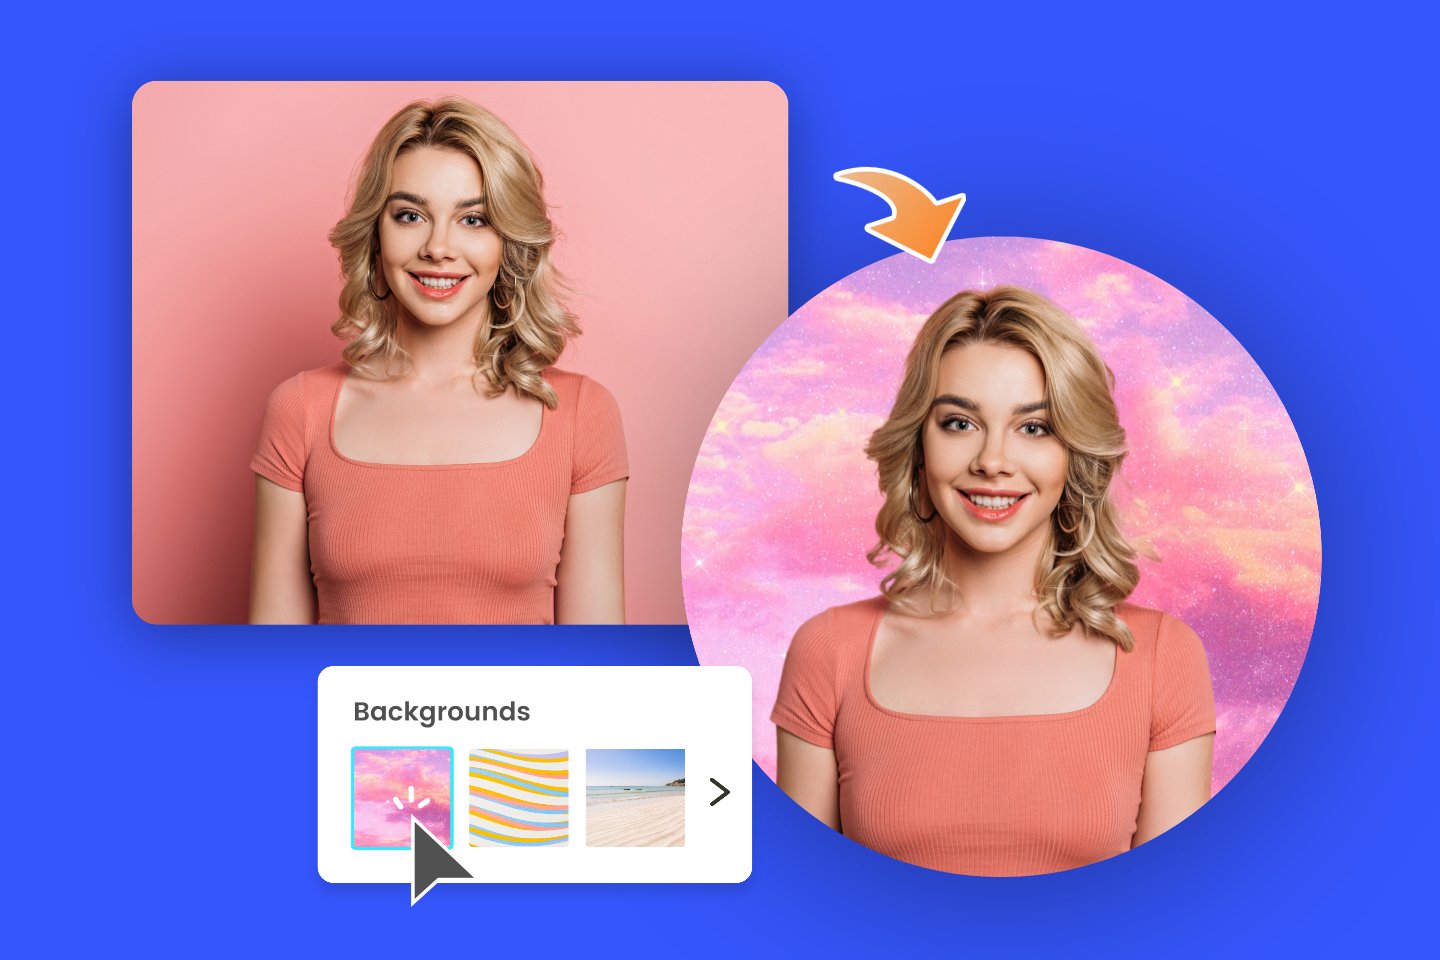 Turn a female selfie into a round profile picture with a colorful background